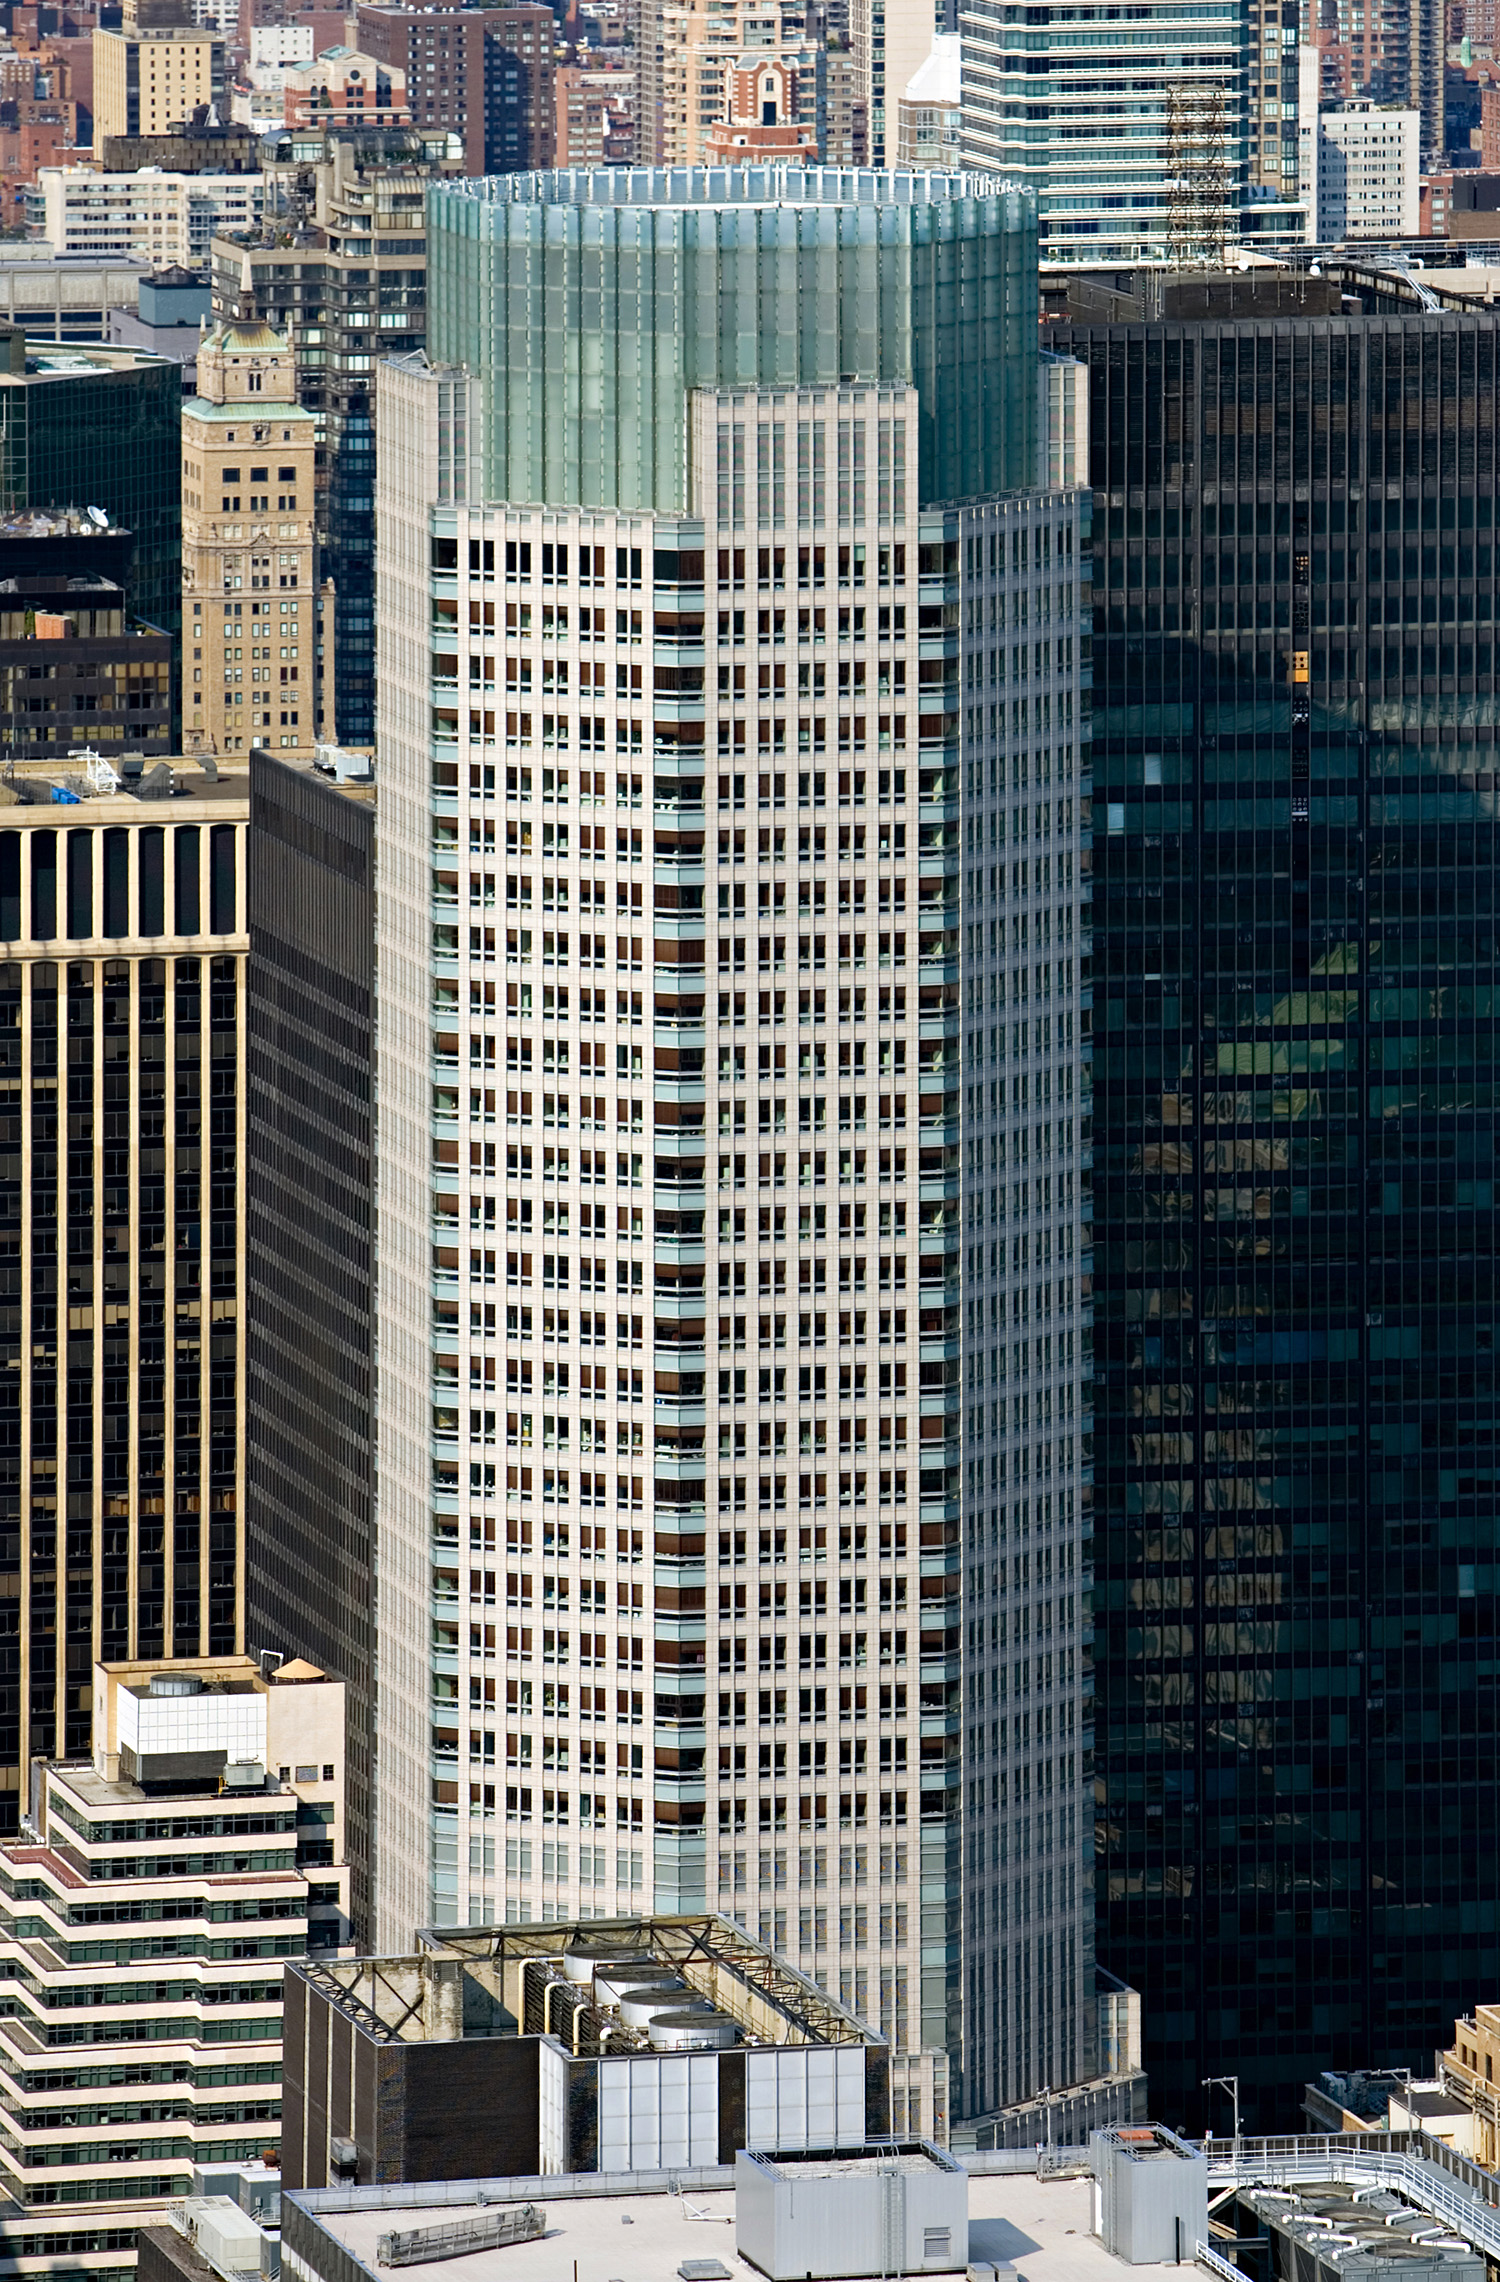 Bear Stearns Building, New York City - View from Empire State Building. © Mathias Beinling